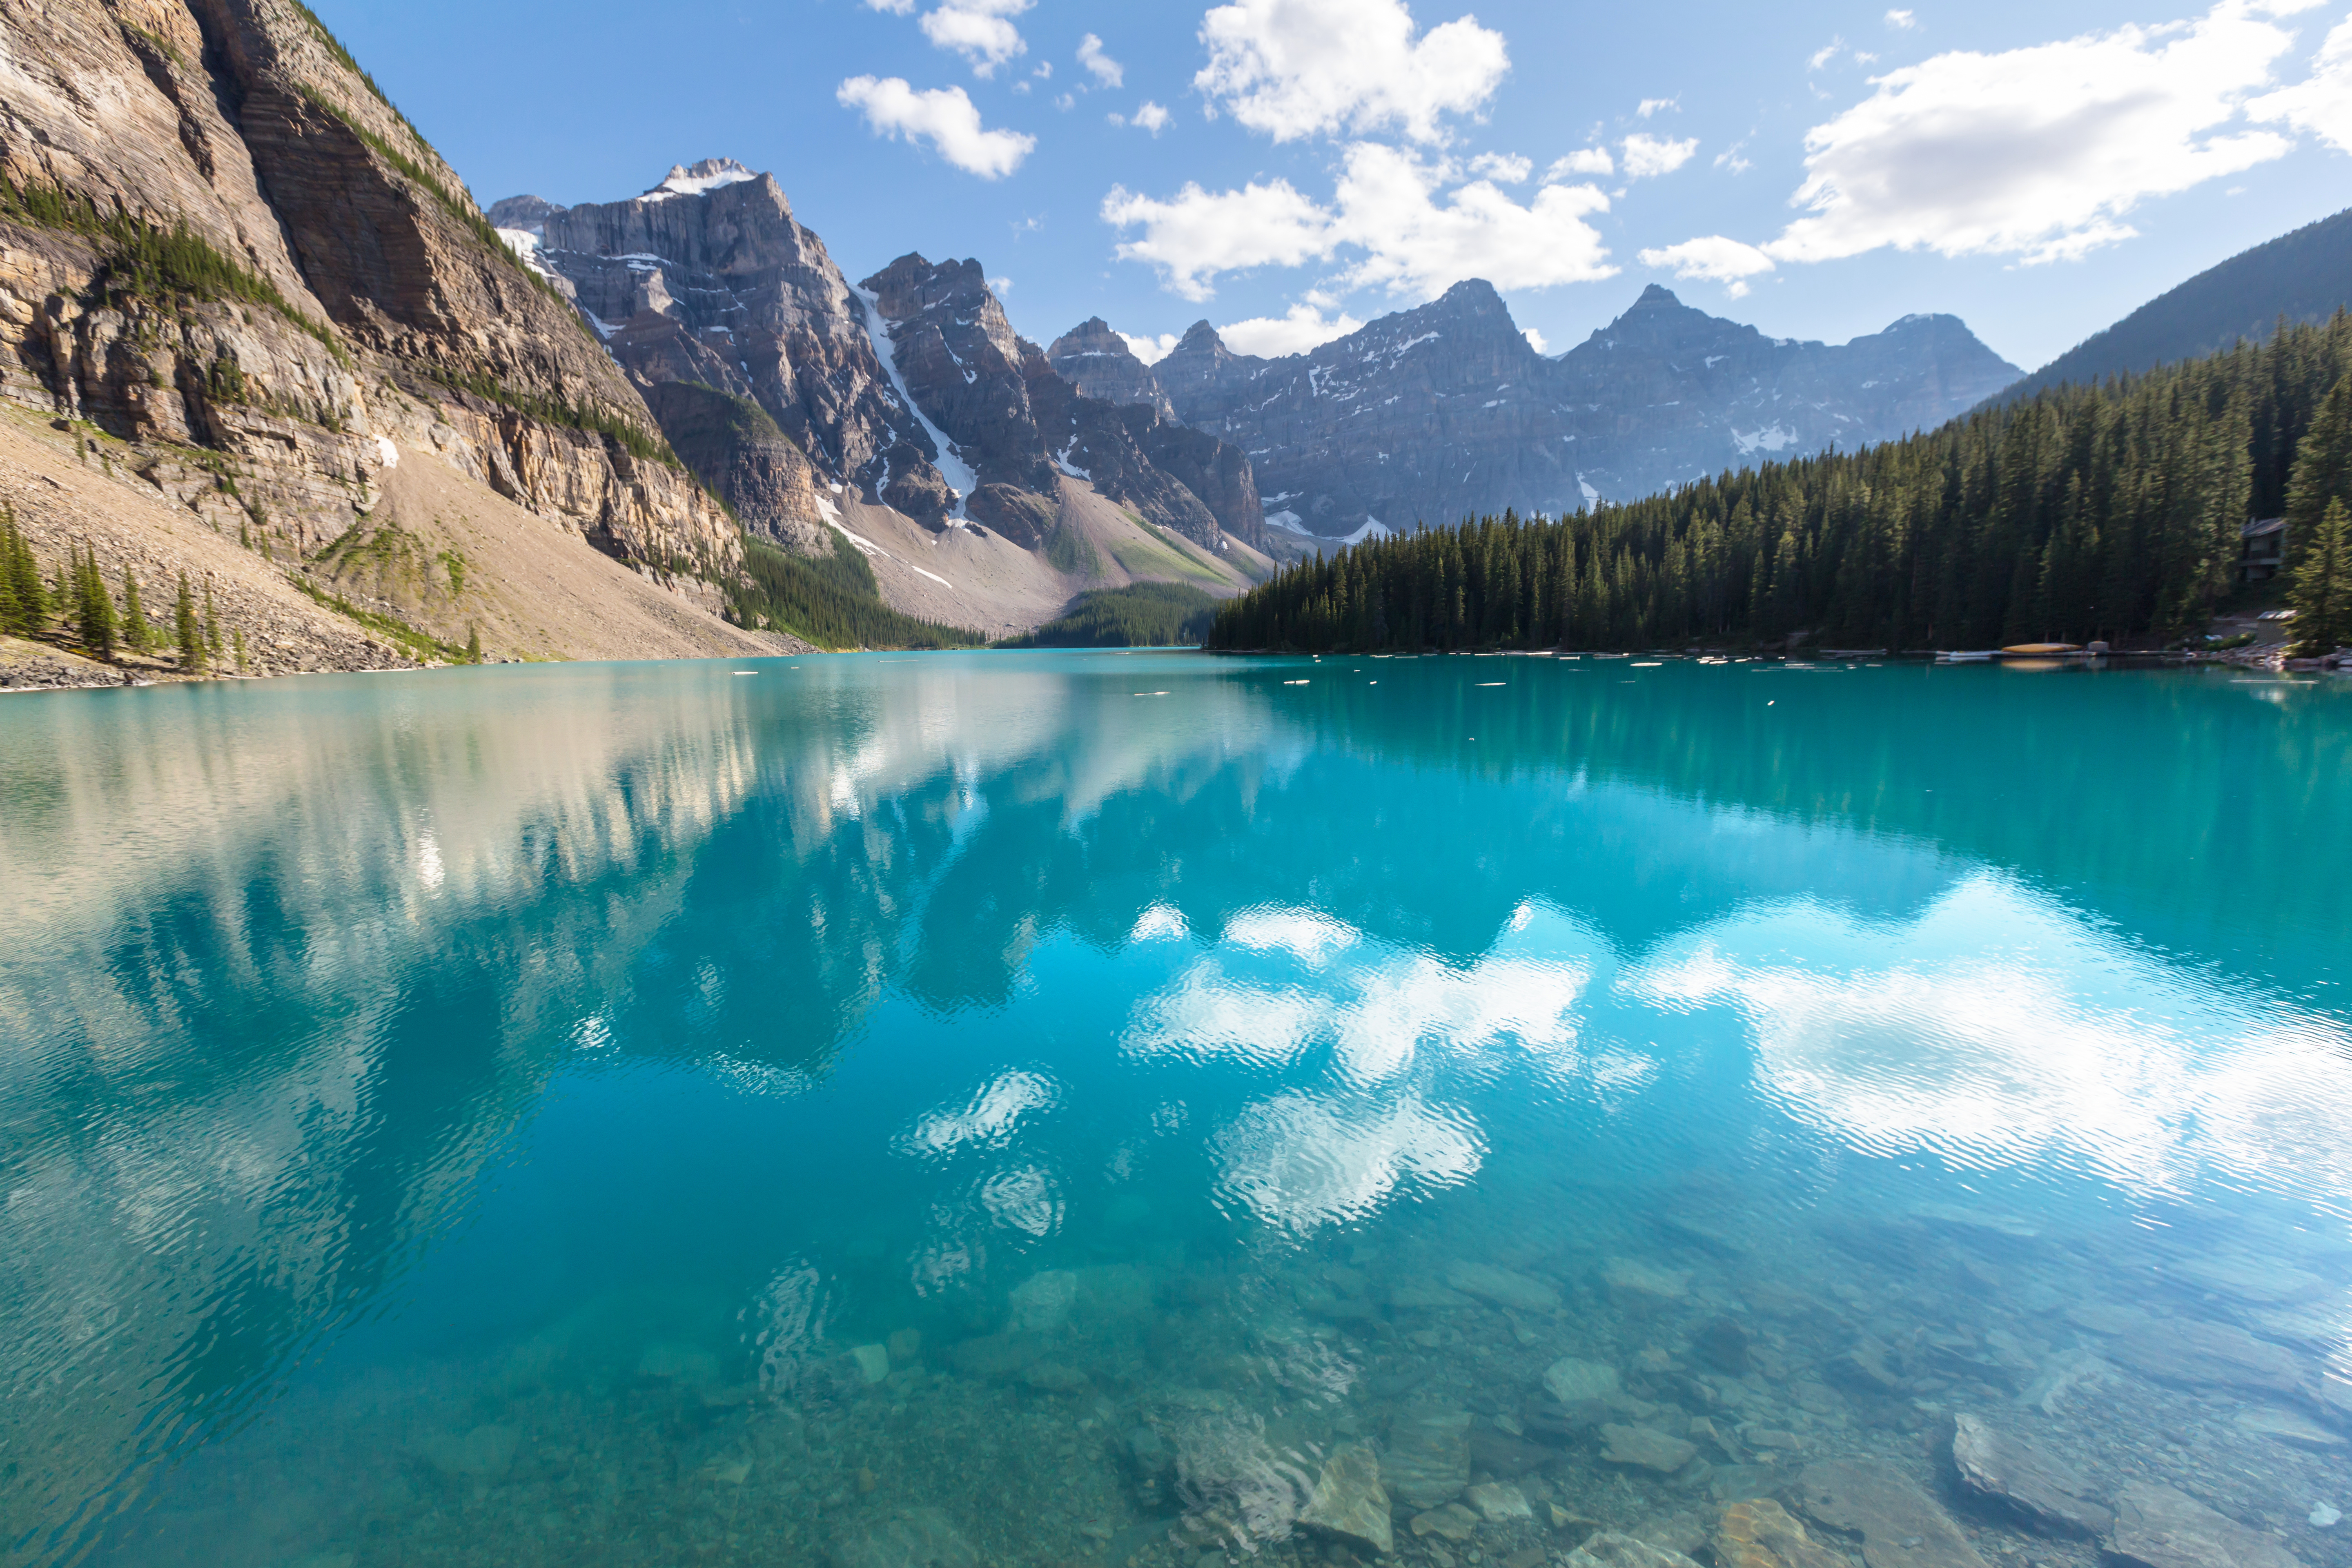 General 5760x3840 landscape lake turquoise reflection forest mountains sky clouds nature sunlight trees Moraine Lake Canada Banff National Park